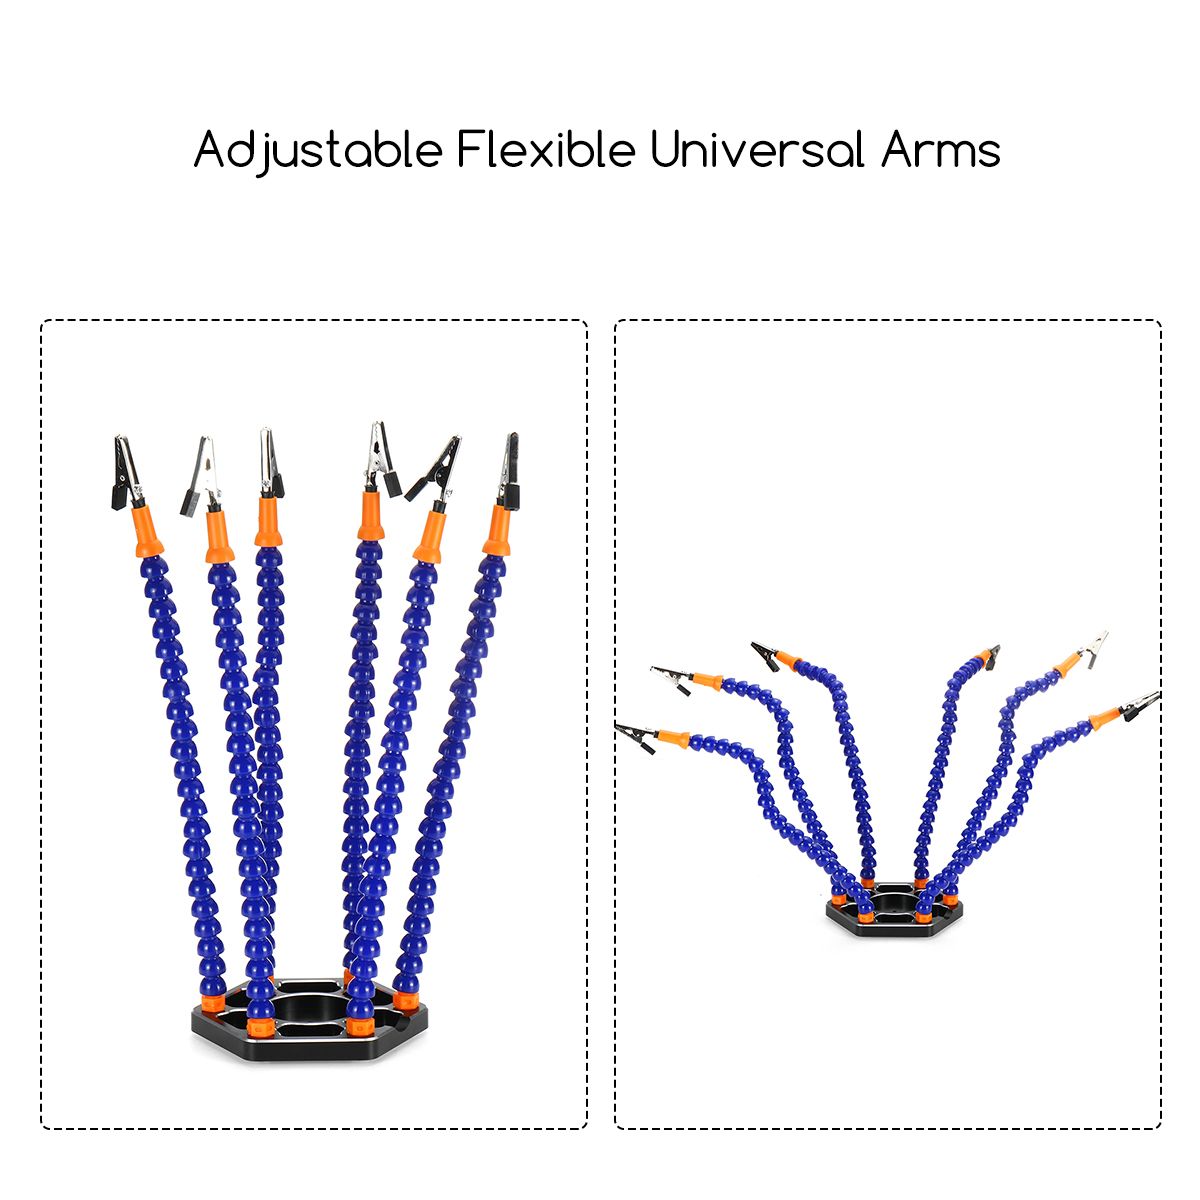 6-Claw-Arms-Helping-Hands-Tool-Flexible-Soldering-Holder-For-Welding-Table-Clamp-1653226